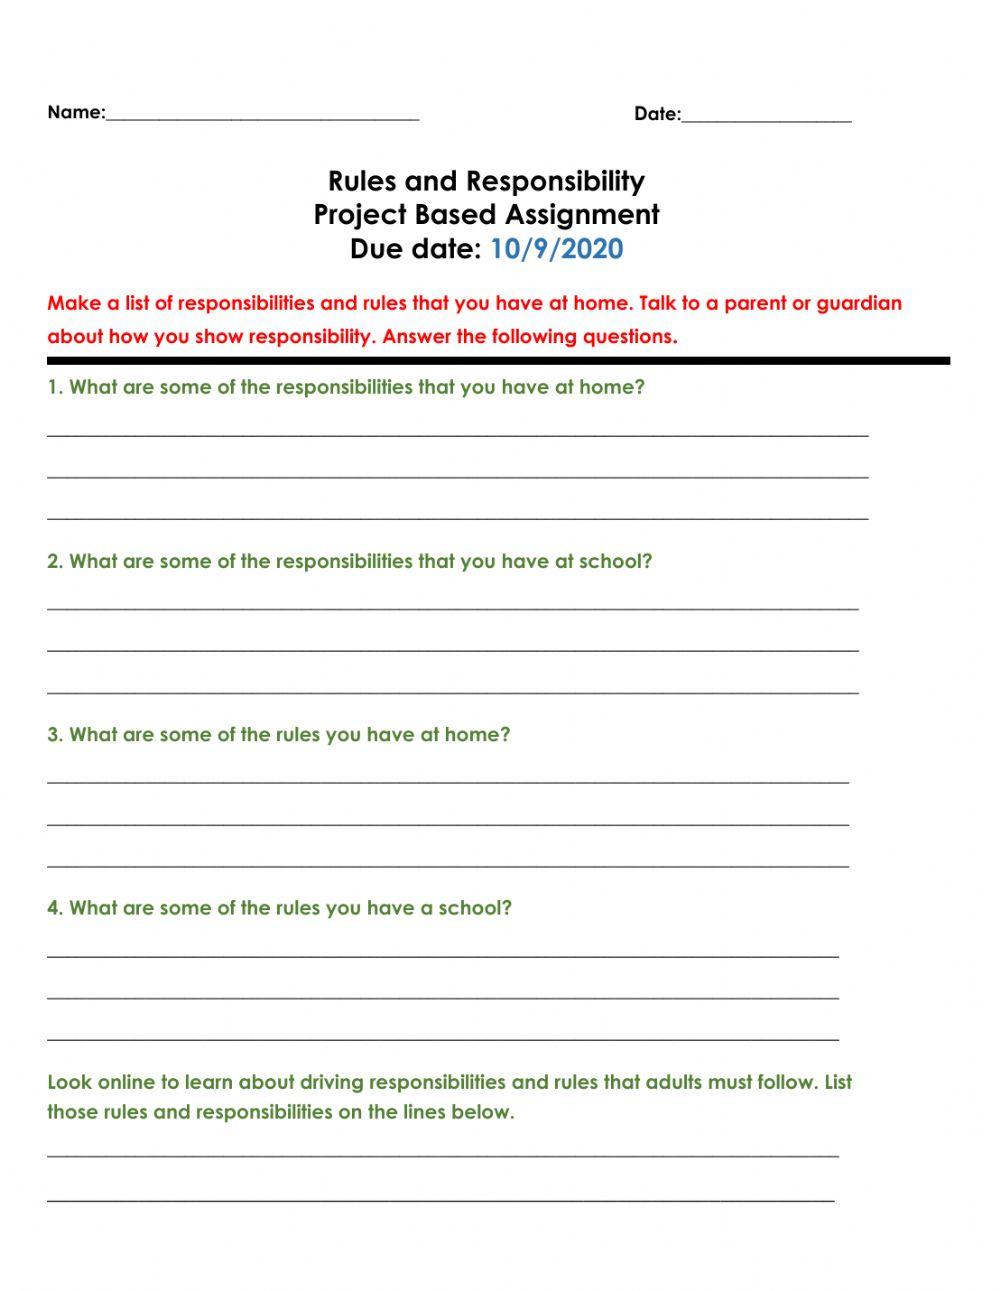 Rules and responsibilities project